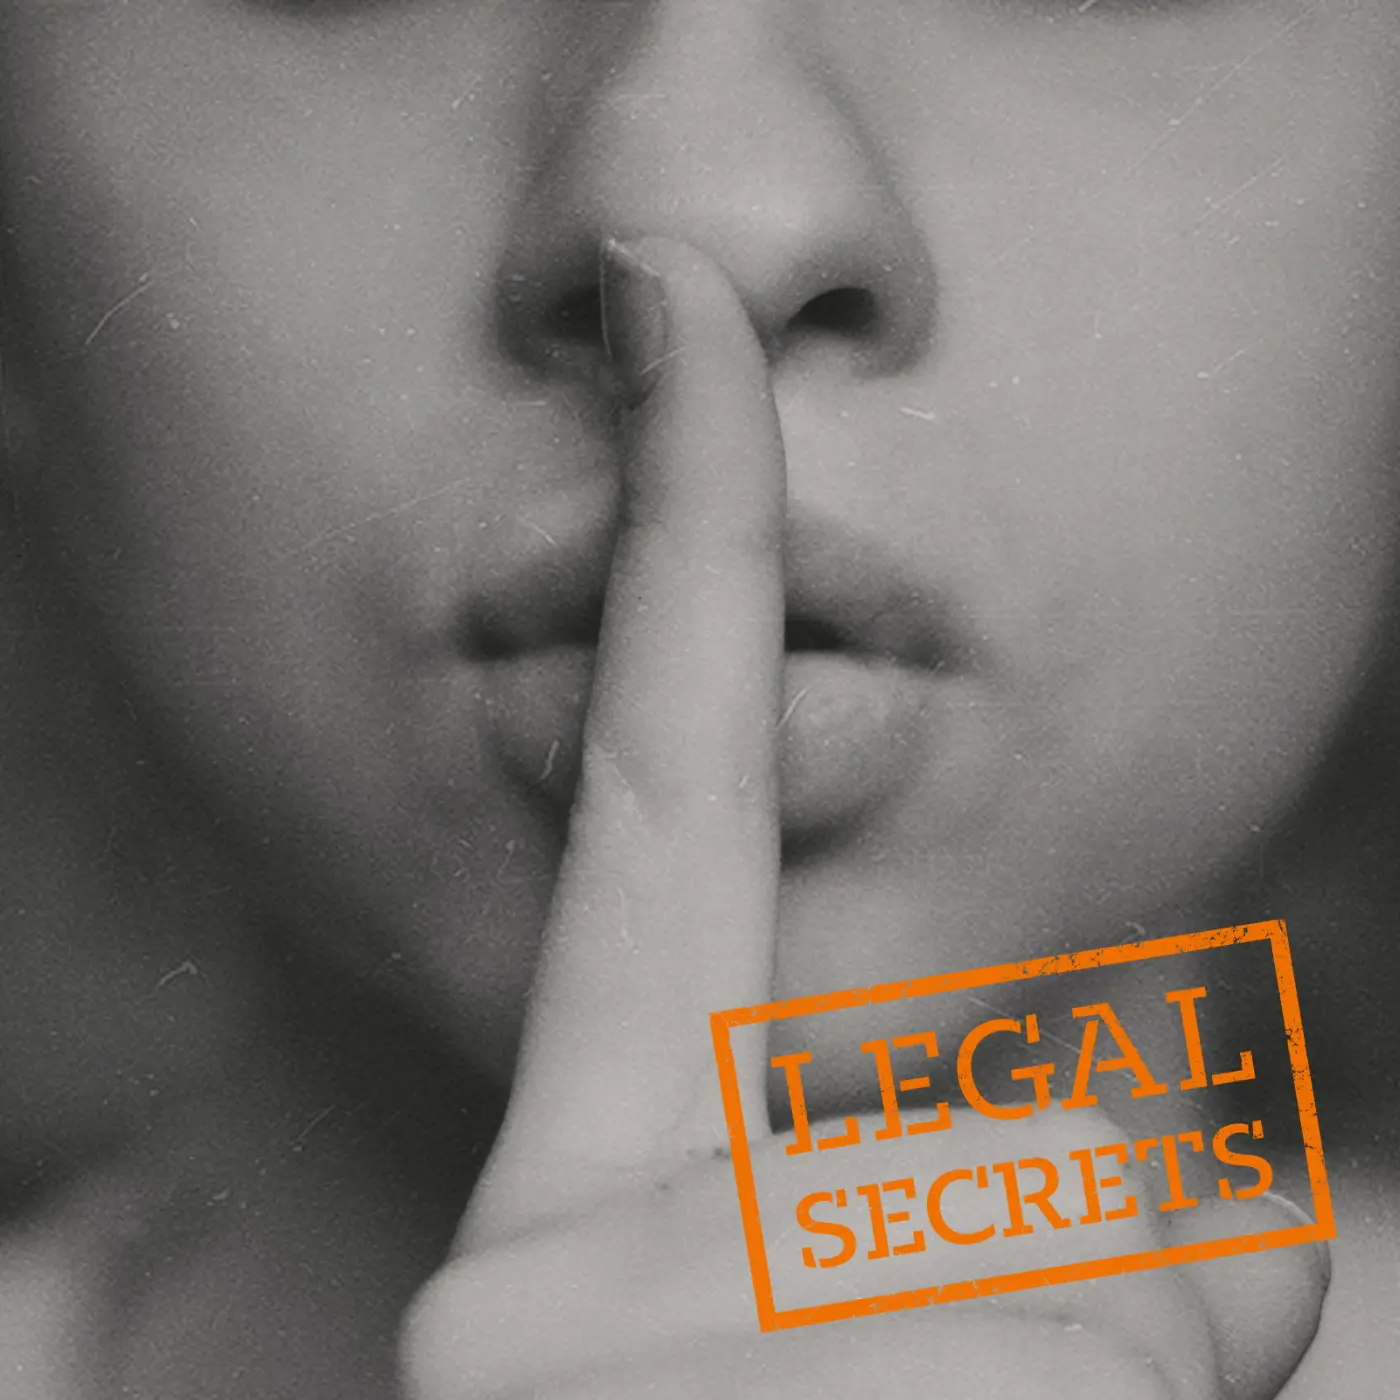 Shhh… How All Businesses Benefit From NDAs (Non-Disclosure Agreements)